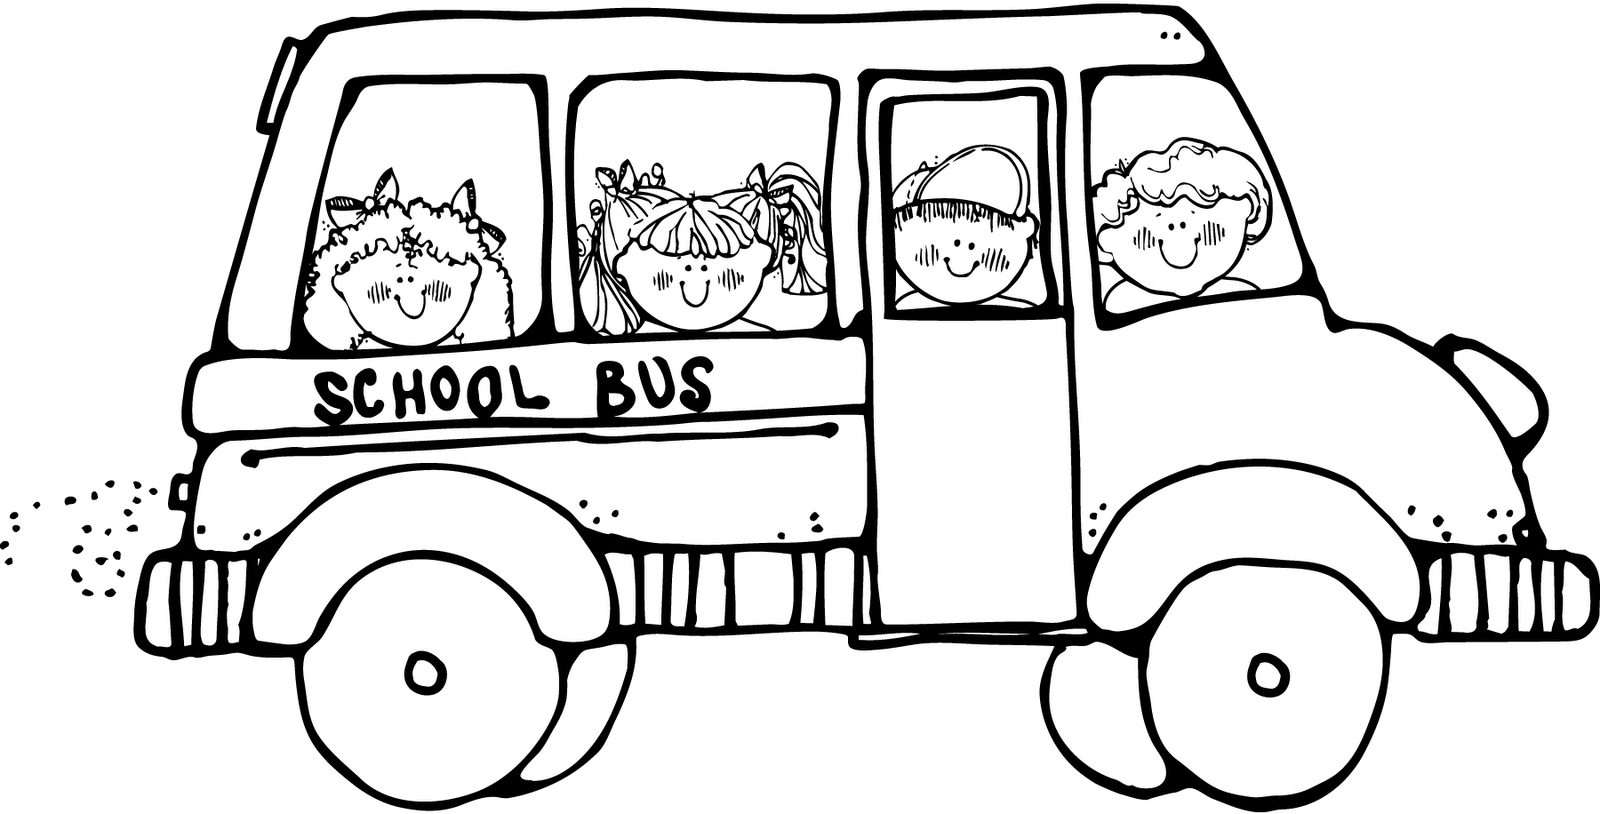 Wheels On The Bus Coloring Page | Clipart Panda - Free Clipart Images